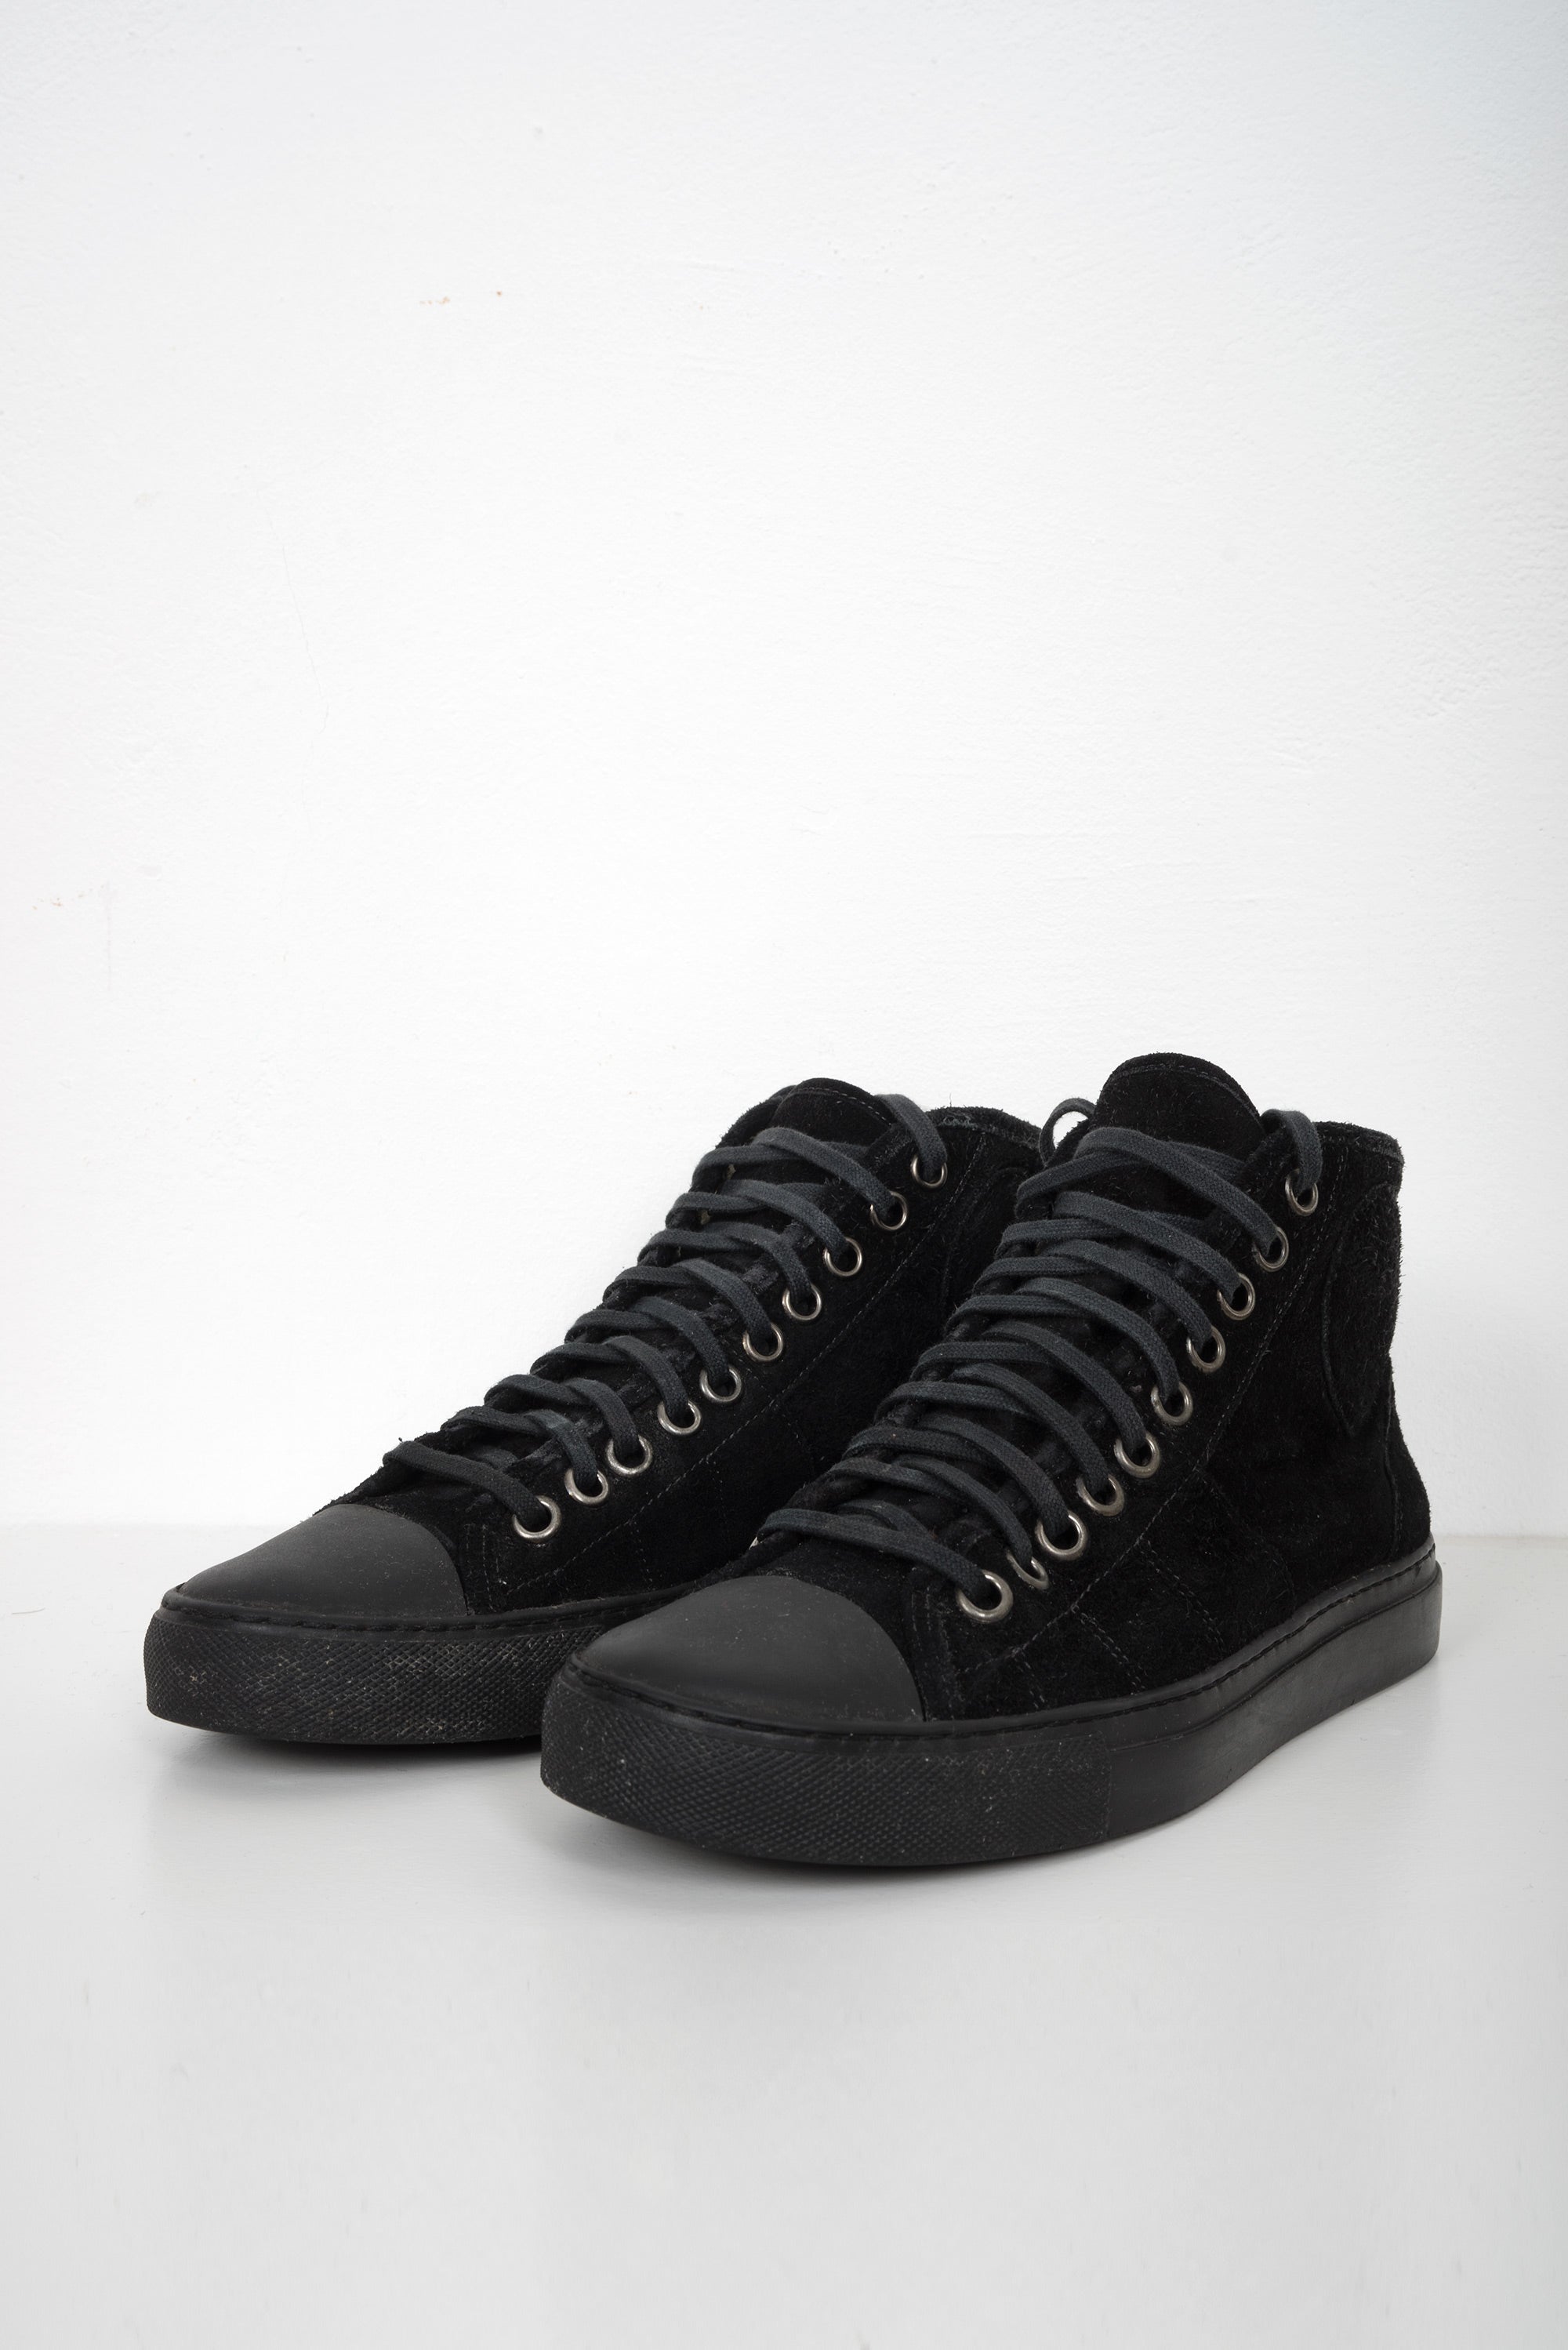 2006 A/W BLACK HIGH-TOP TRAINERS IN SUEDE